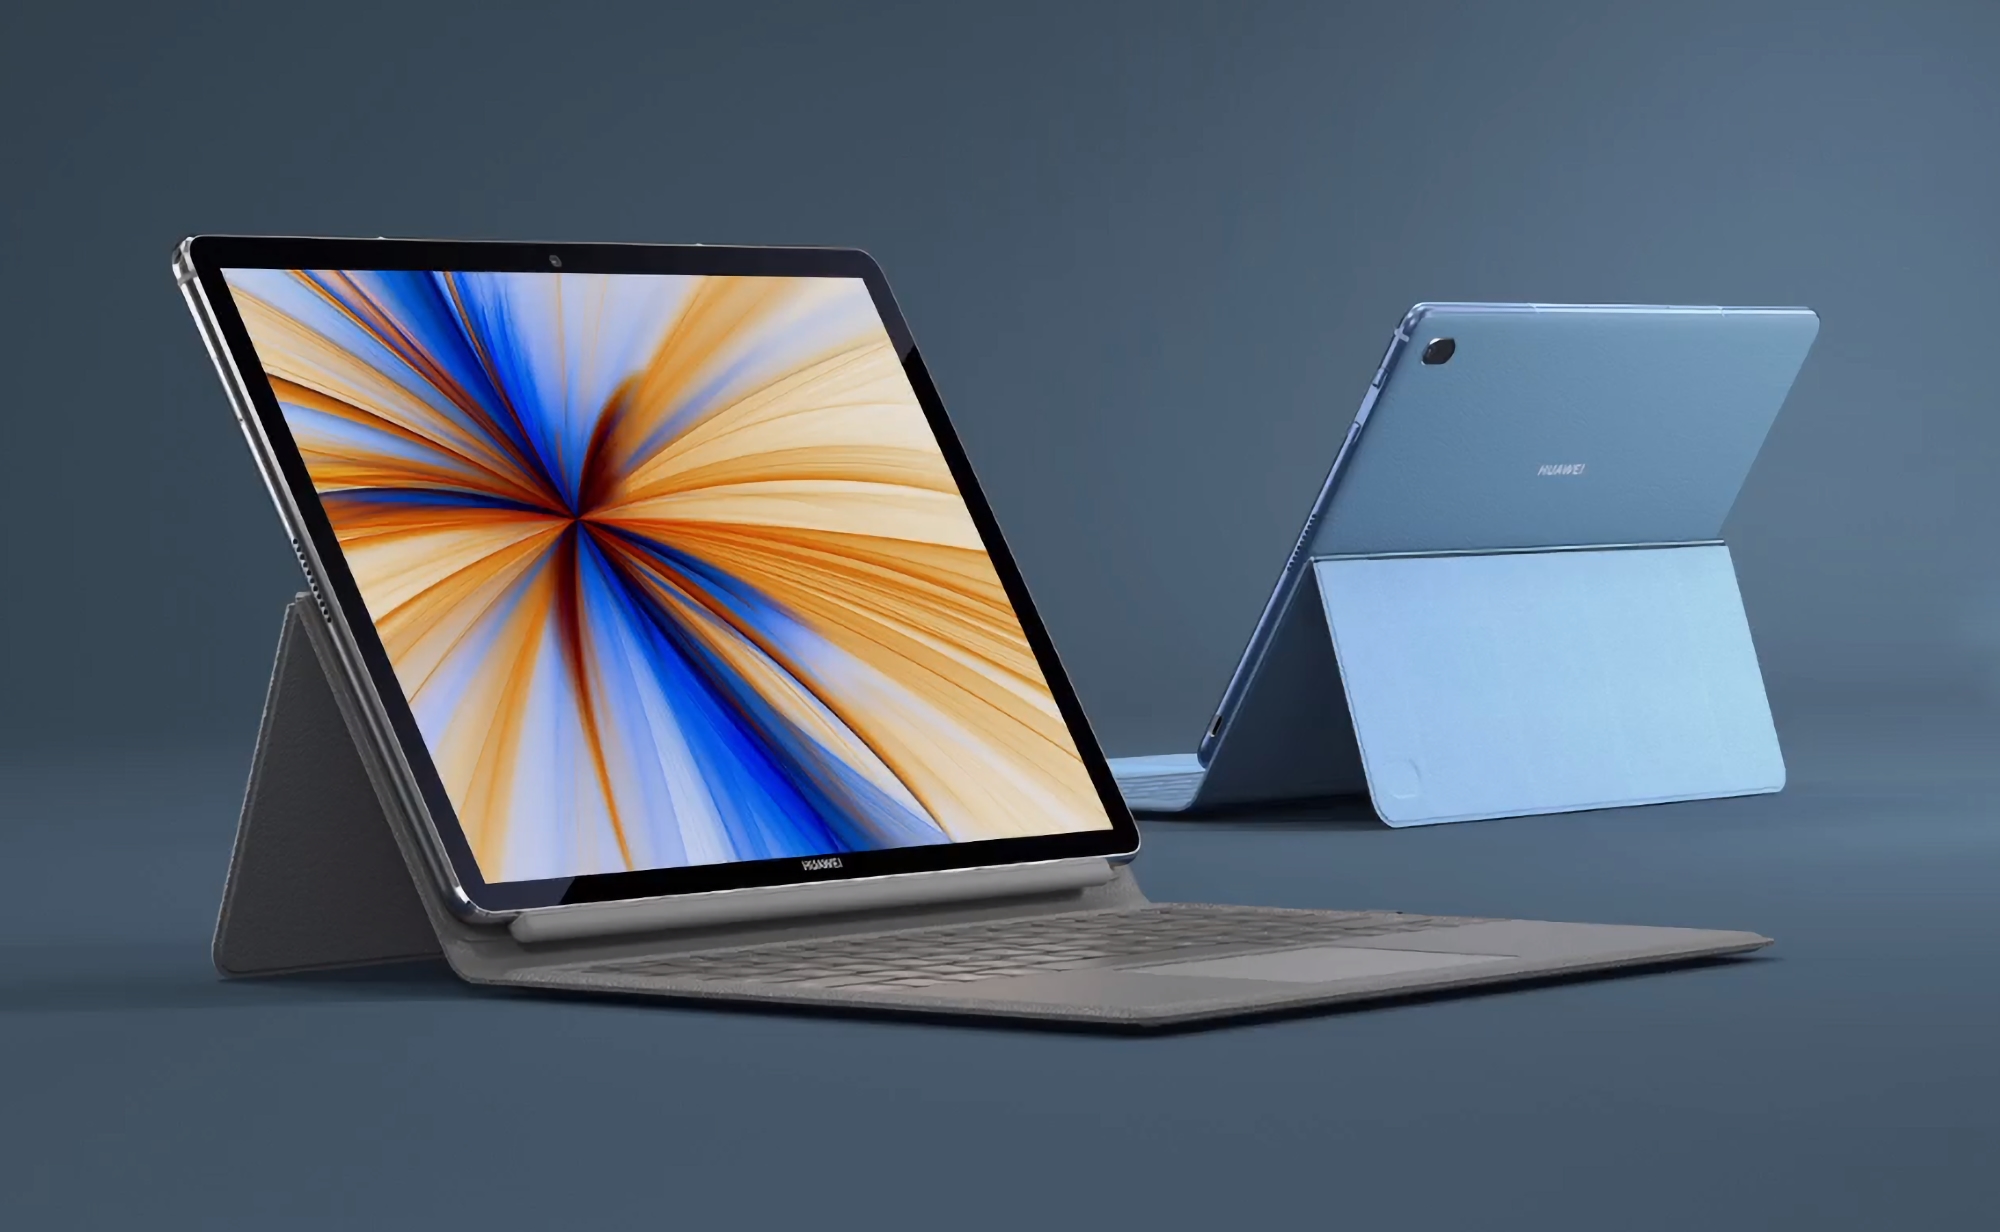 Source: Huawei prepares laptop to compete with Microsoft Surface